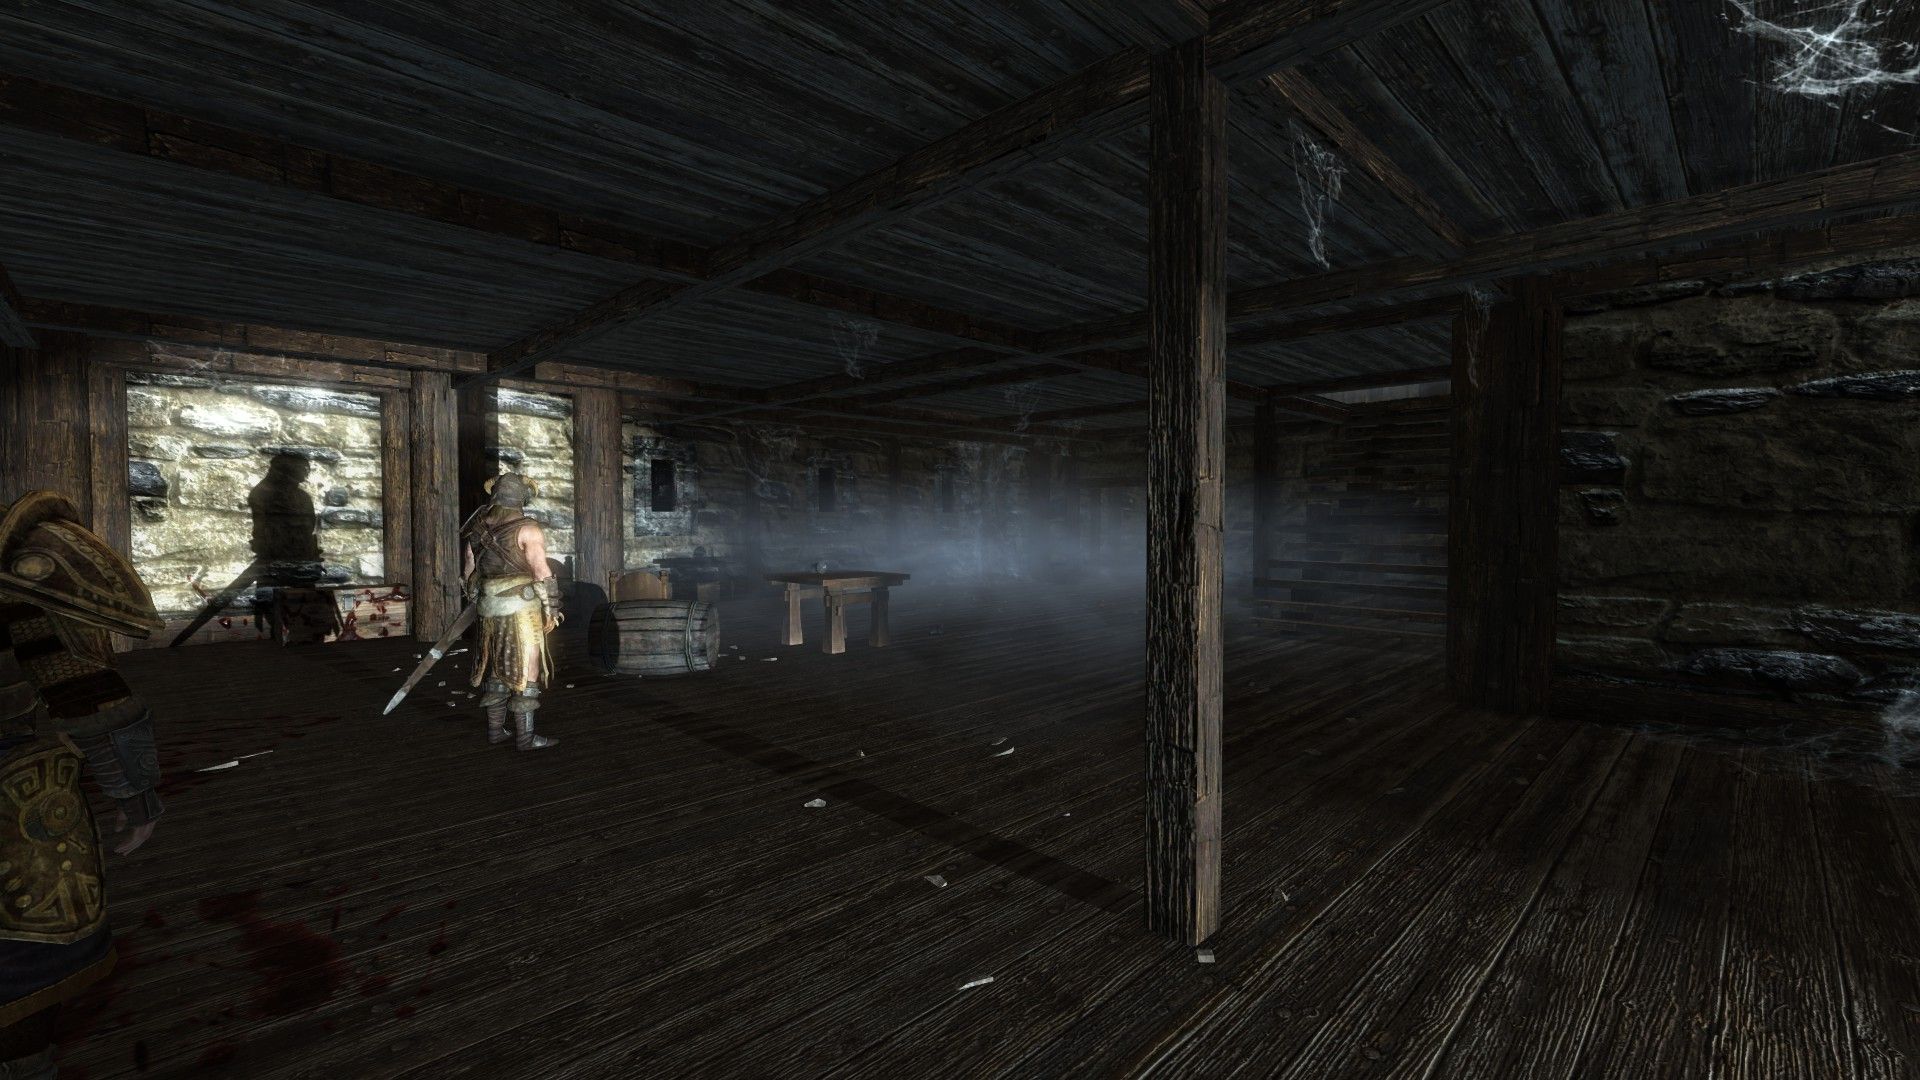 A man stands inside a starkly-lit house that has clearly been long abandoned.